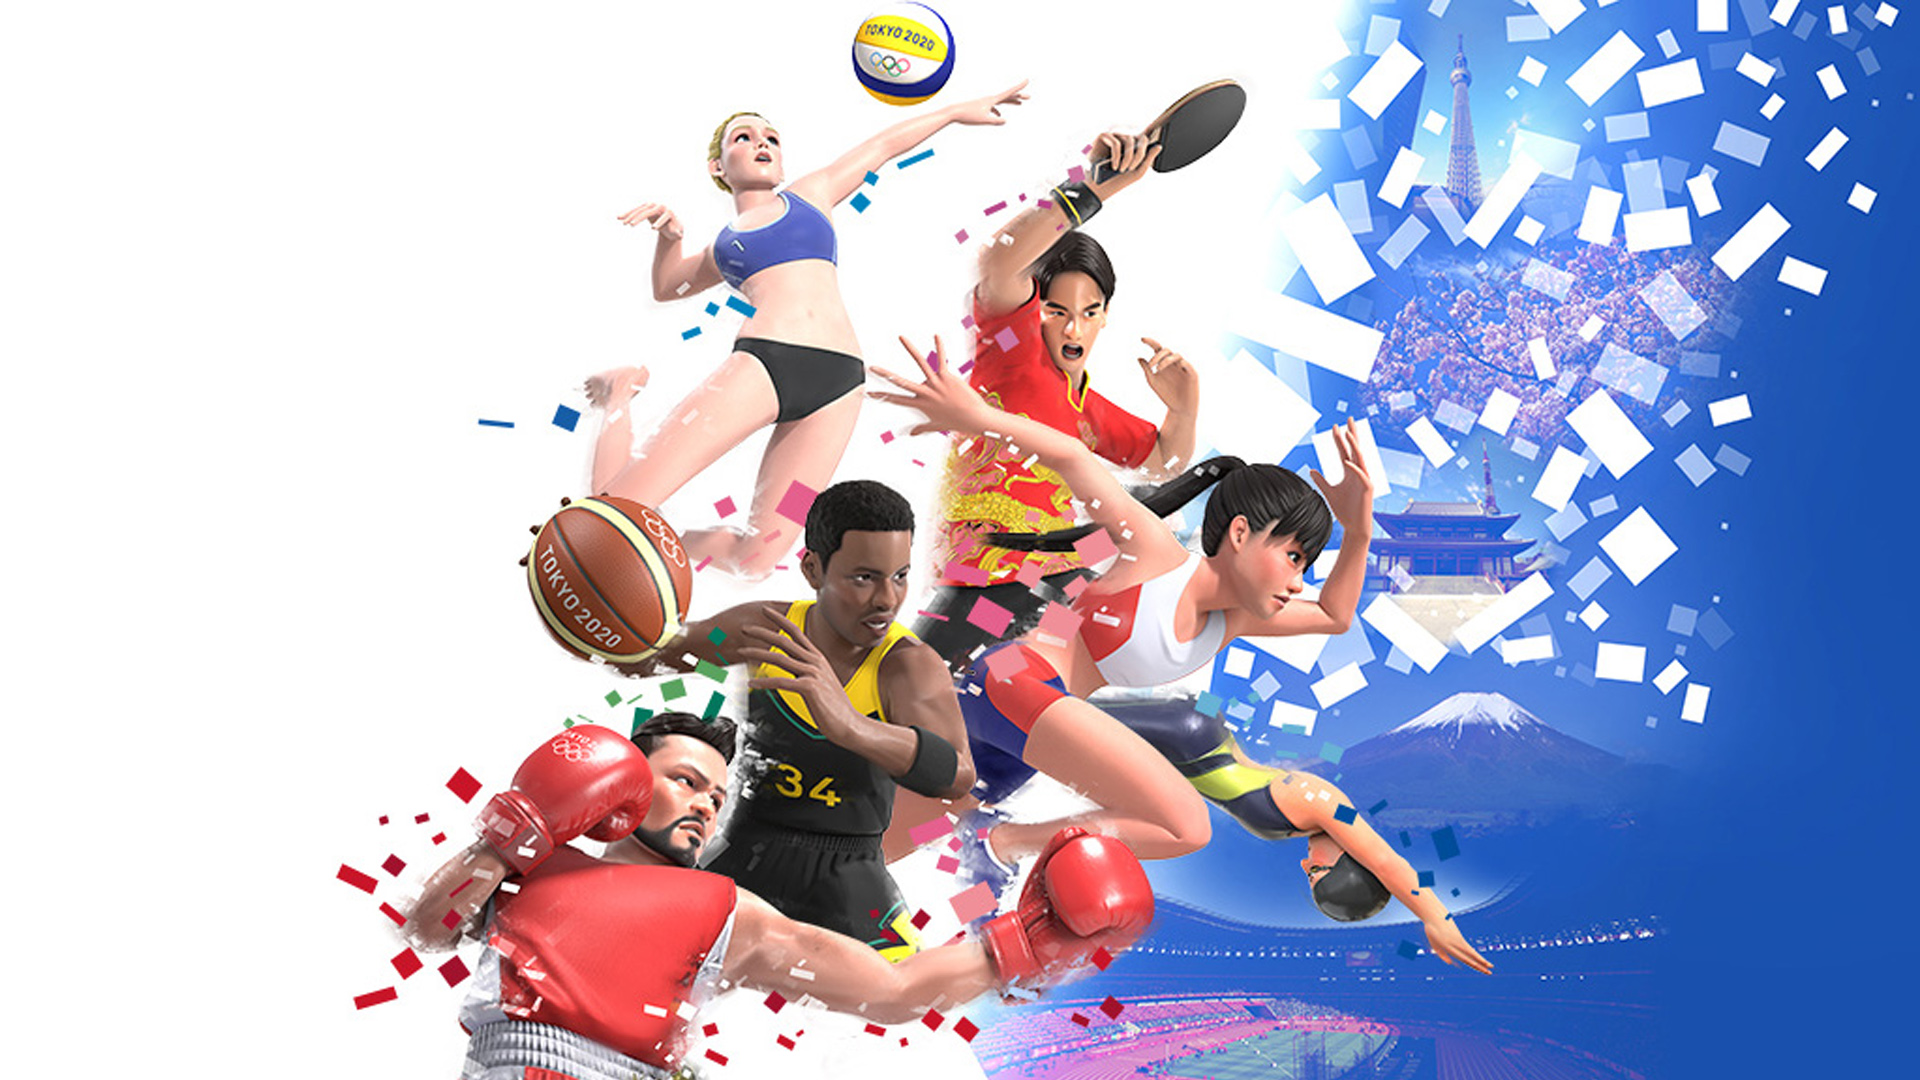 Olympic Games Tokyo 2020 The Official Video Game data uscita